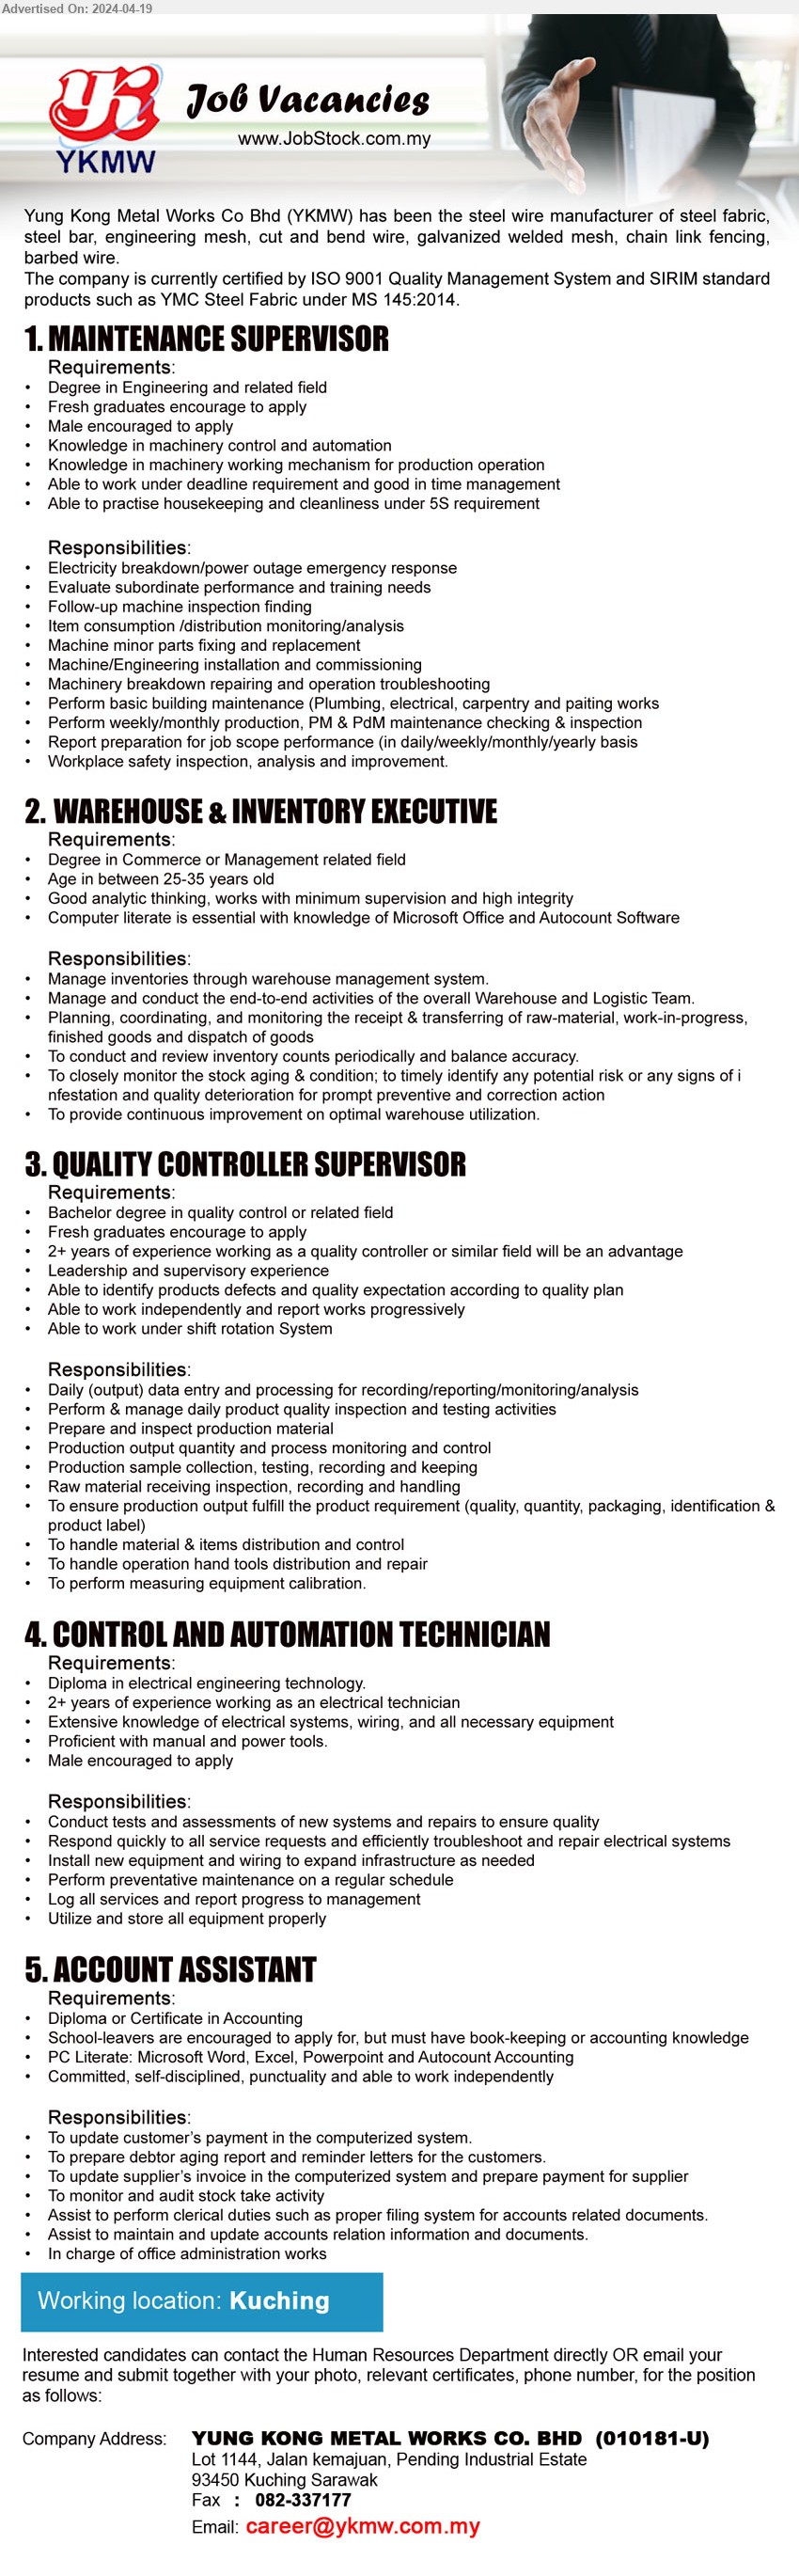 YUNG KONG METAL WORKS CO BHD - 1. MAINTENANCE SUPERVISOR   (Kuching), Degree in Engineering and related field, Fresh graduates encourage to apply,...
2. WAREHOUSE & INVENTORY EXECUTIVE  (Kuching), Degree in Commerce or Management related field, Age in between 25-35 years old,...
3. QUALITY CONTROLLER SUPERVISOR (Kuching), Bachelor degree in quality control or related field, Fresh graduates encourage to apply,...
4. CONTROL AND AUTOMATION TECHNICIAN  (Kuching), Diploma in Electrical Engineering technology, 2+ years of experience working as an electrical technician,...
5. ACCOUNT ASSISTANT  (Kuching), Diploma or Certificate in Accounting, School-leavers are encouraged to apply,...
Email resume to ....